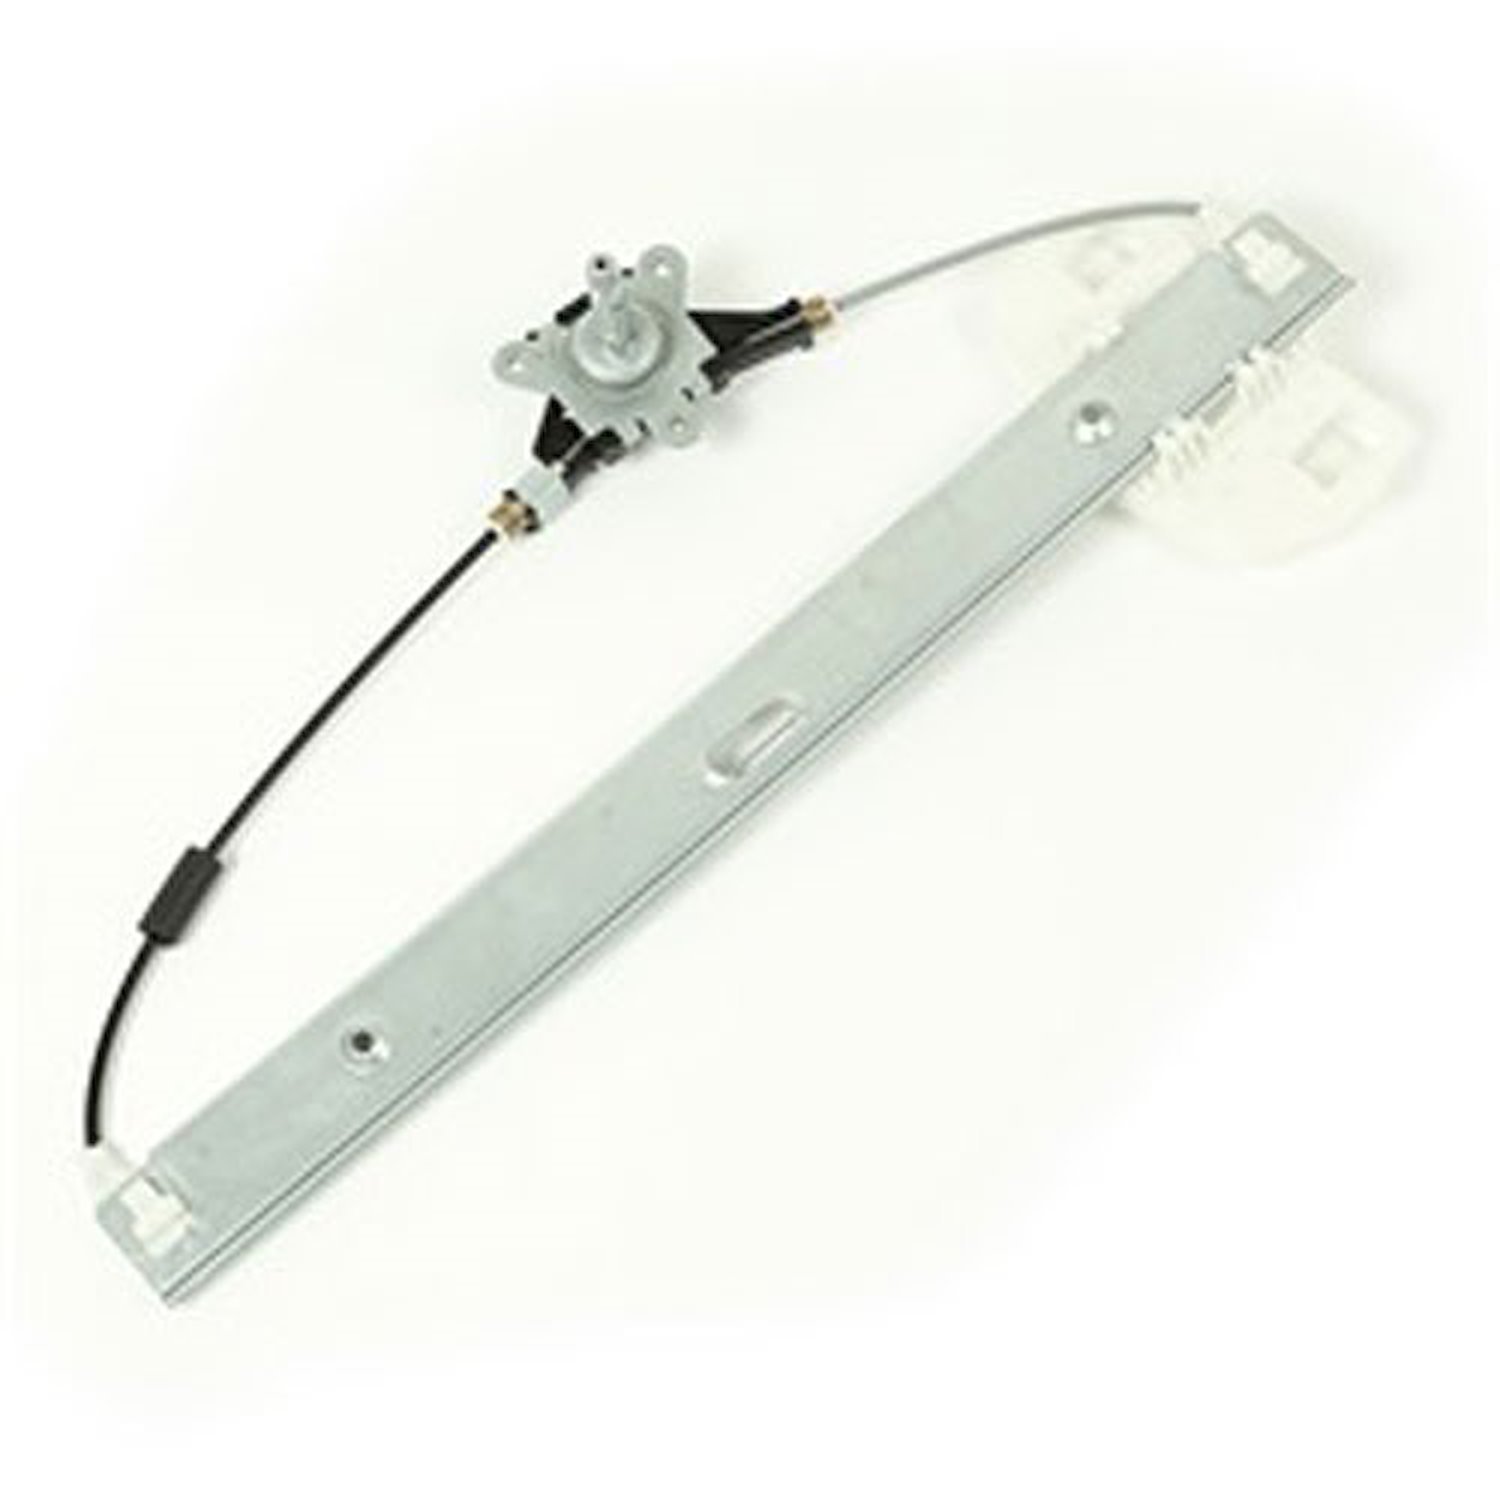 This right front manual window regulator from Omix-ADA fits 07-16 Jeep Wranglers with full doors.